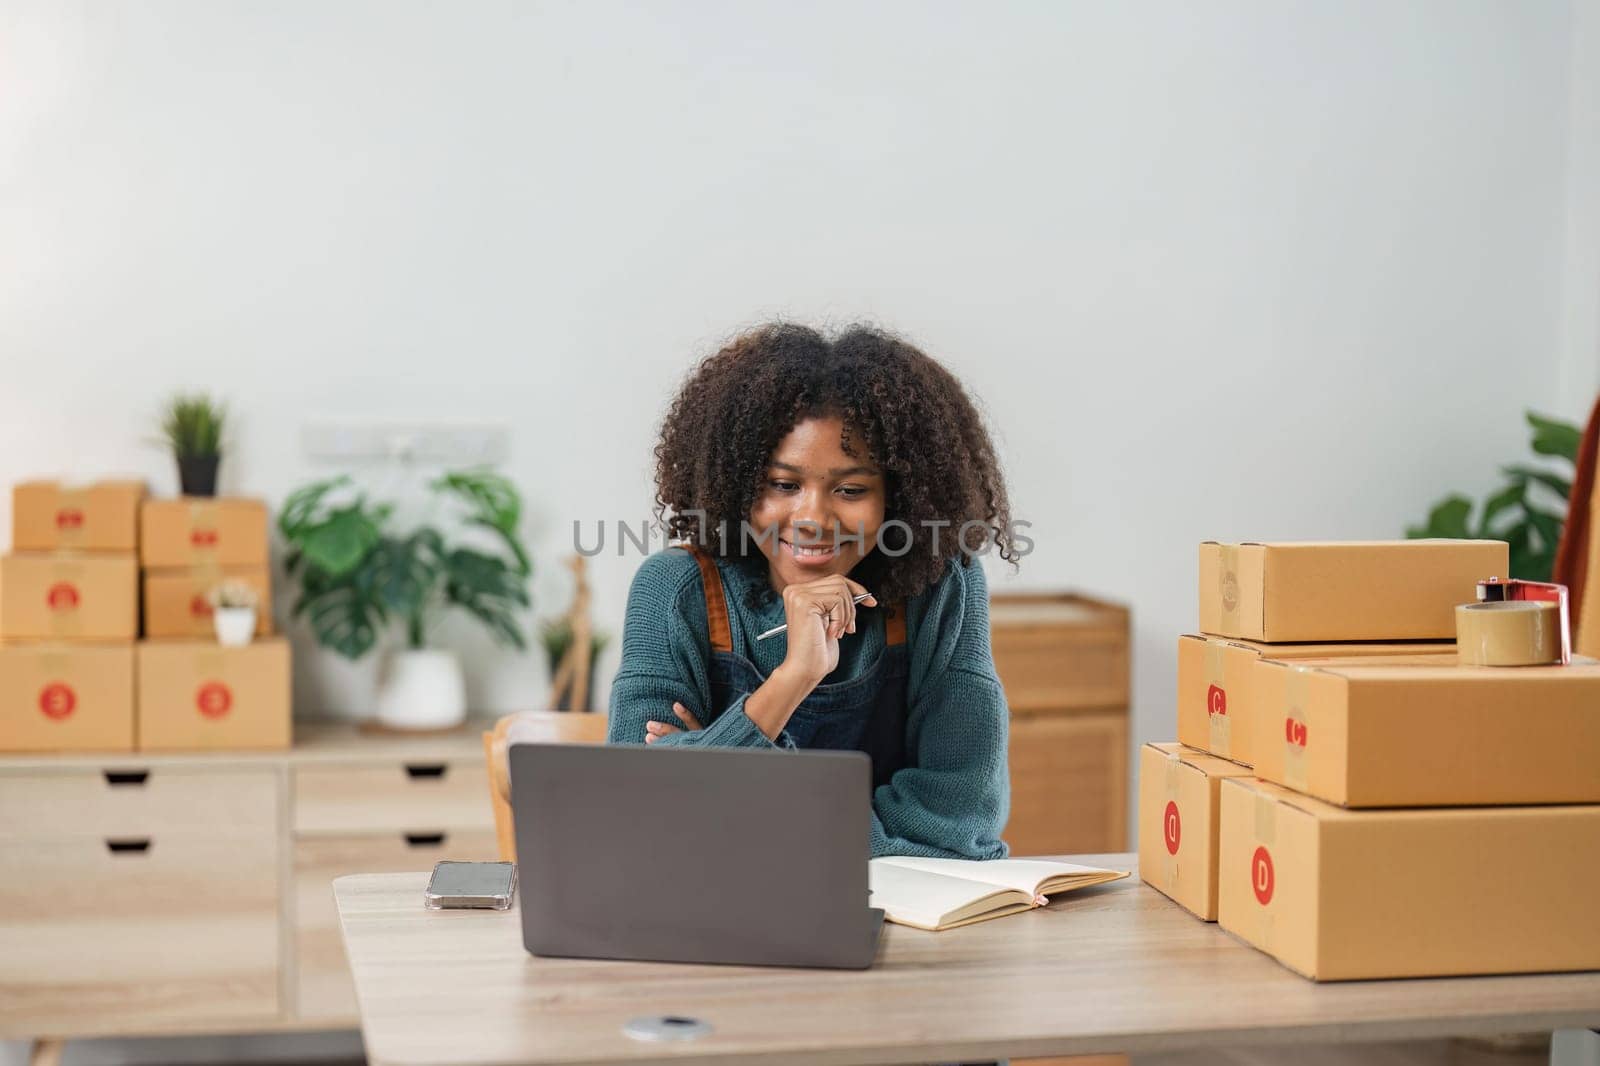 Entrepreneur, small business, SME, freelance woman working from home with lots of boxes on the side. Use smartphones and laptops for commercial monitoring. online marketing packaging box online sale.